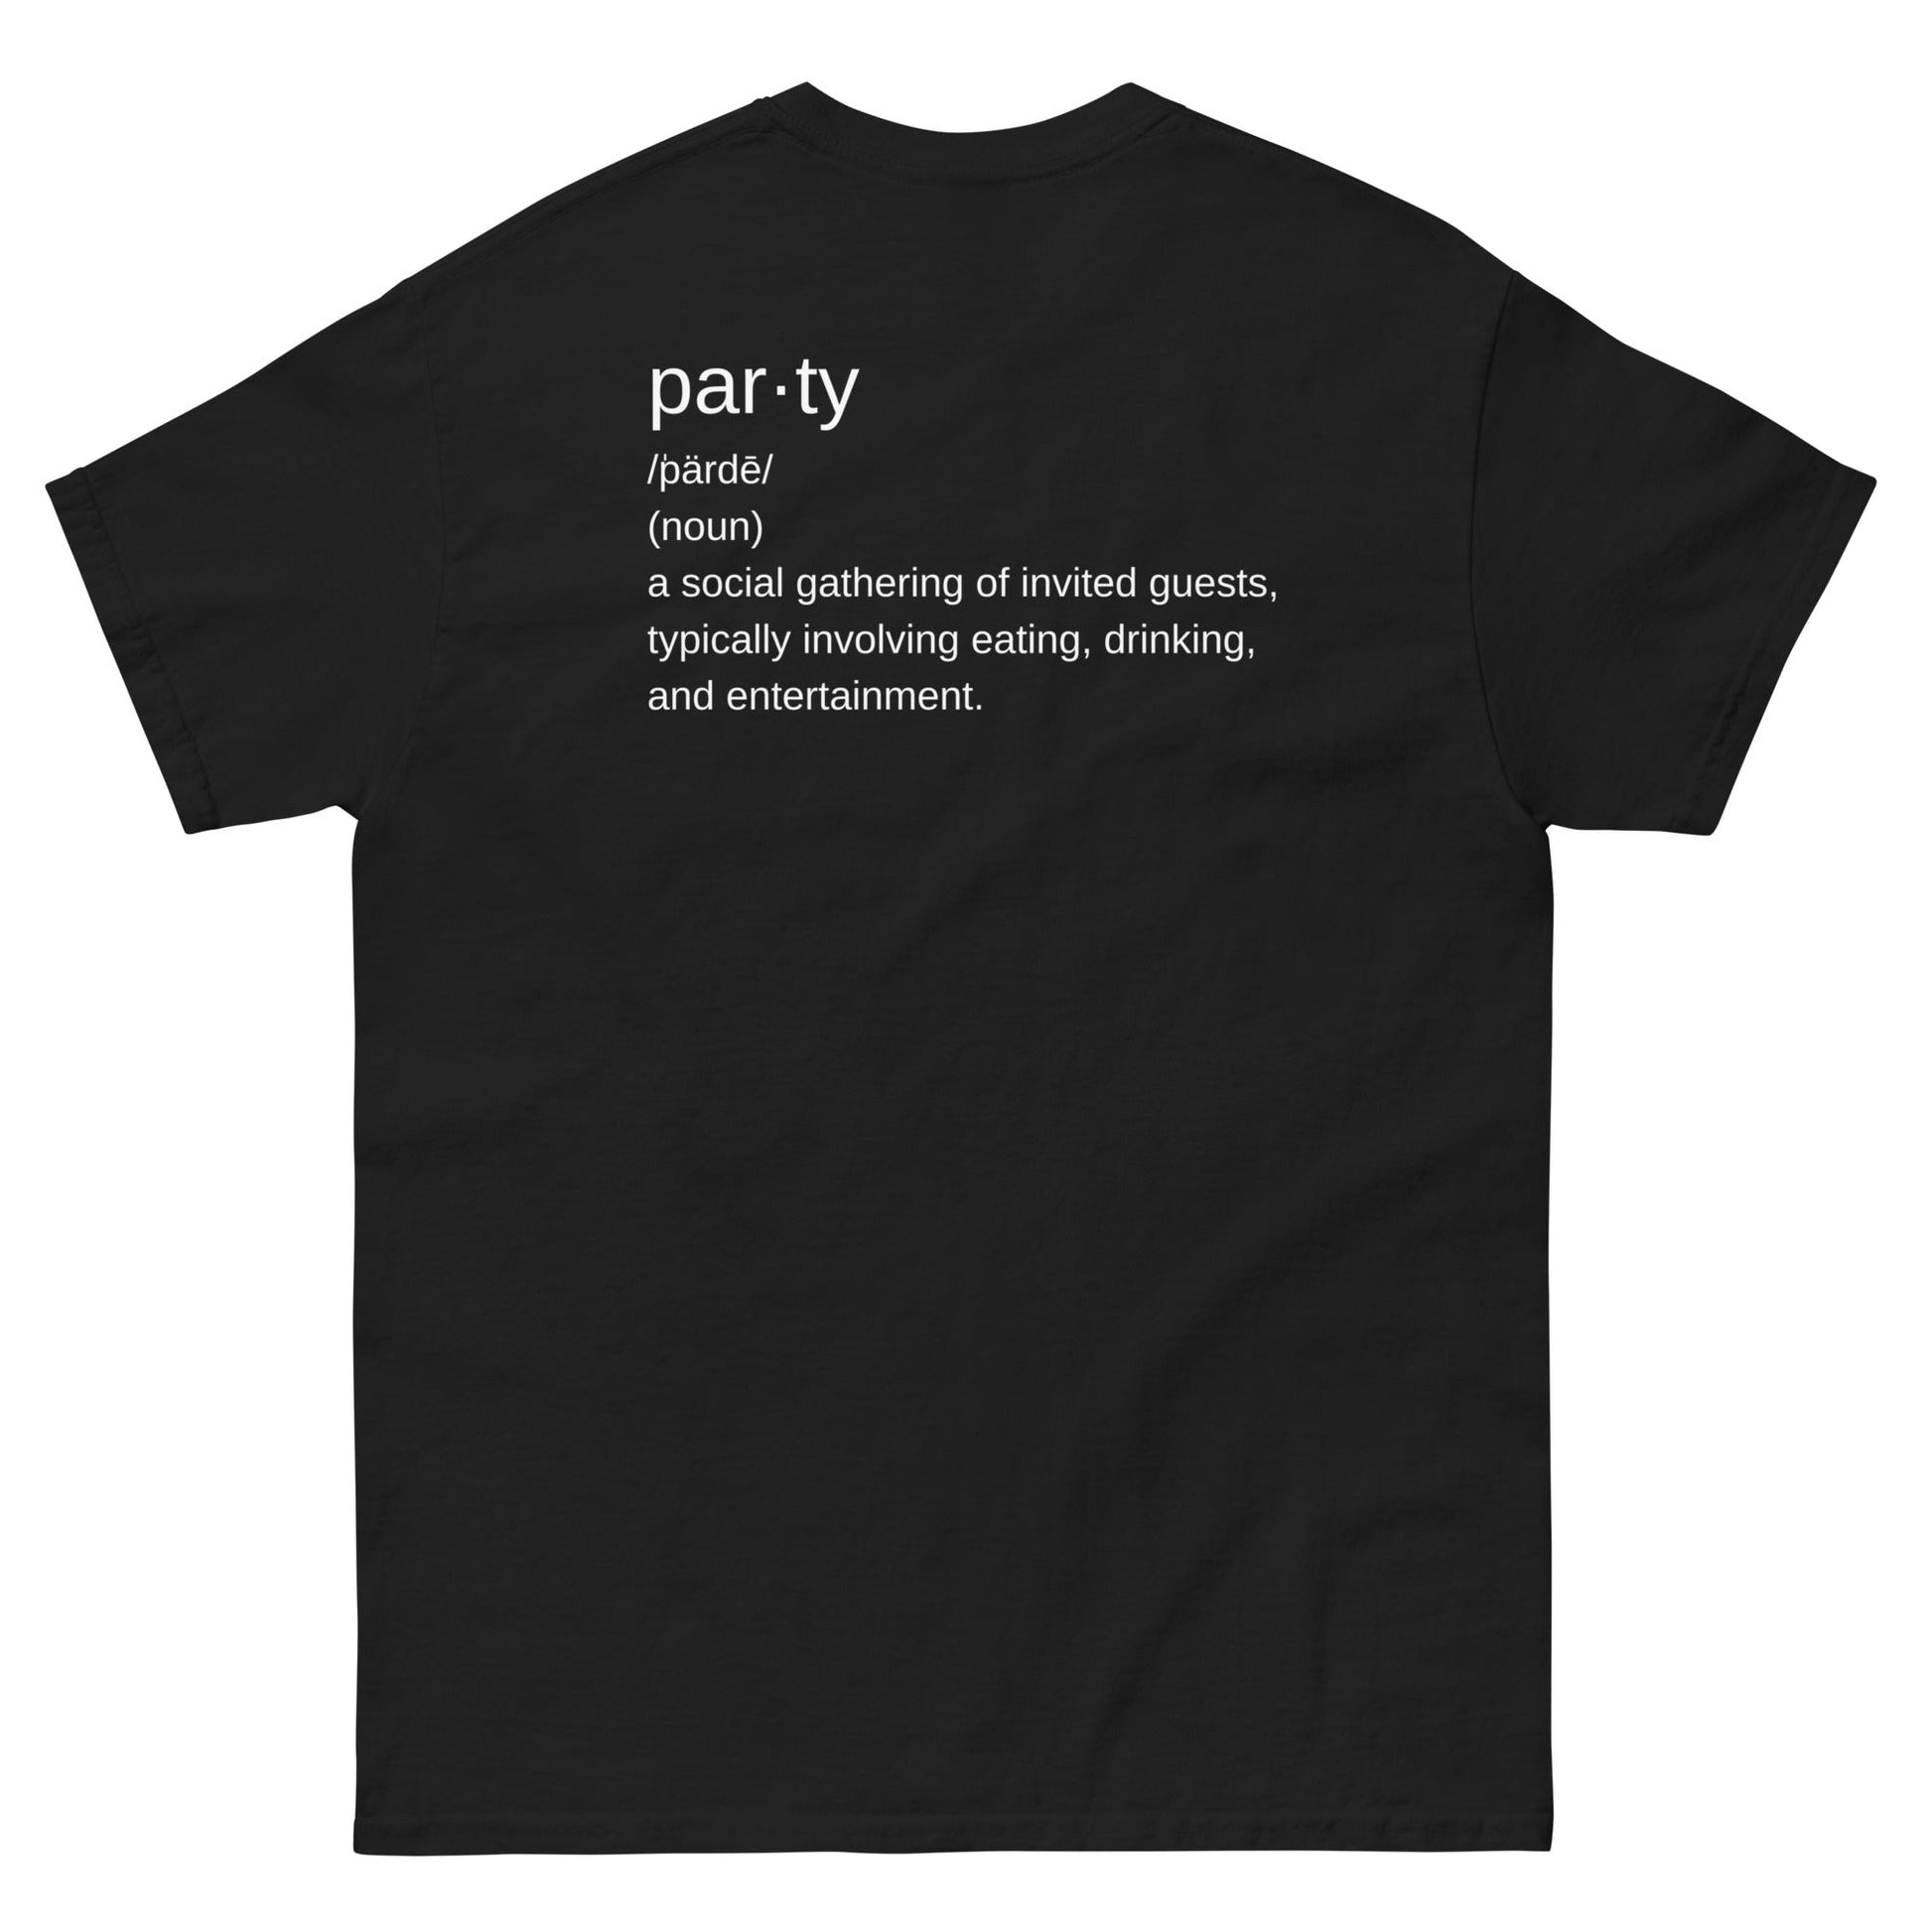 Farris Wheel "Party" Men's Classic Tee - BeExtra! Apparel & More